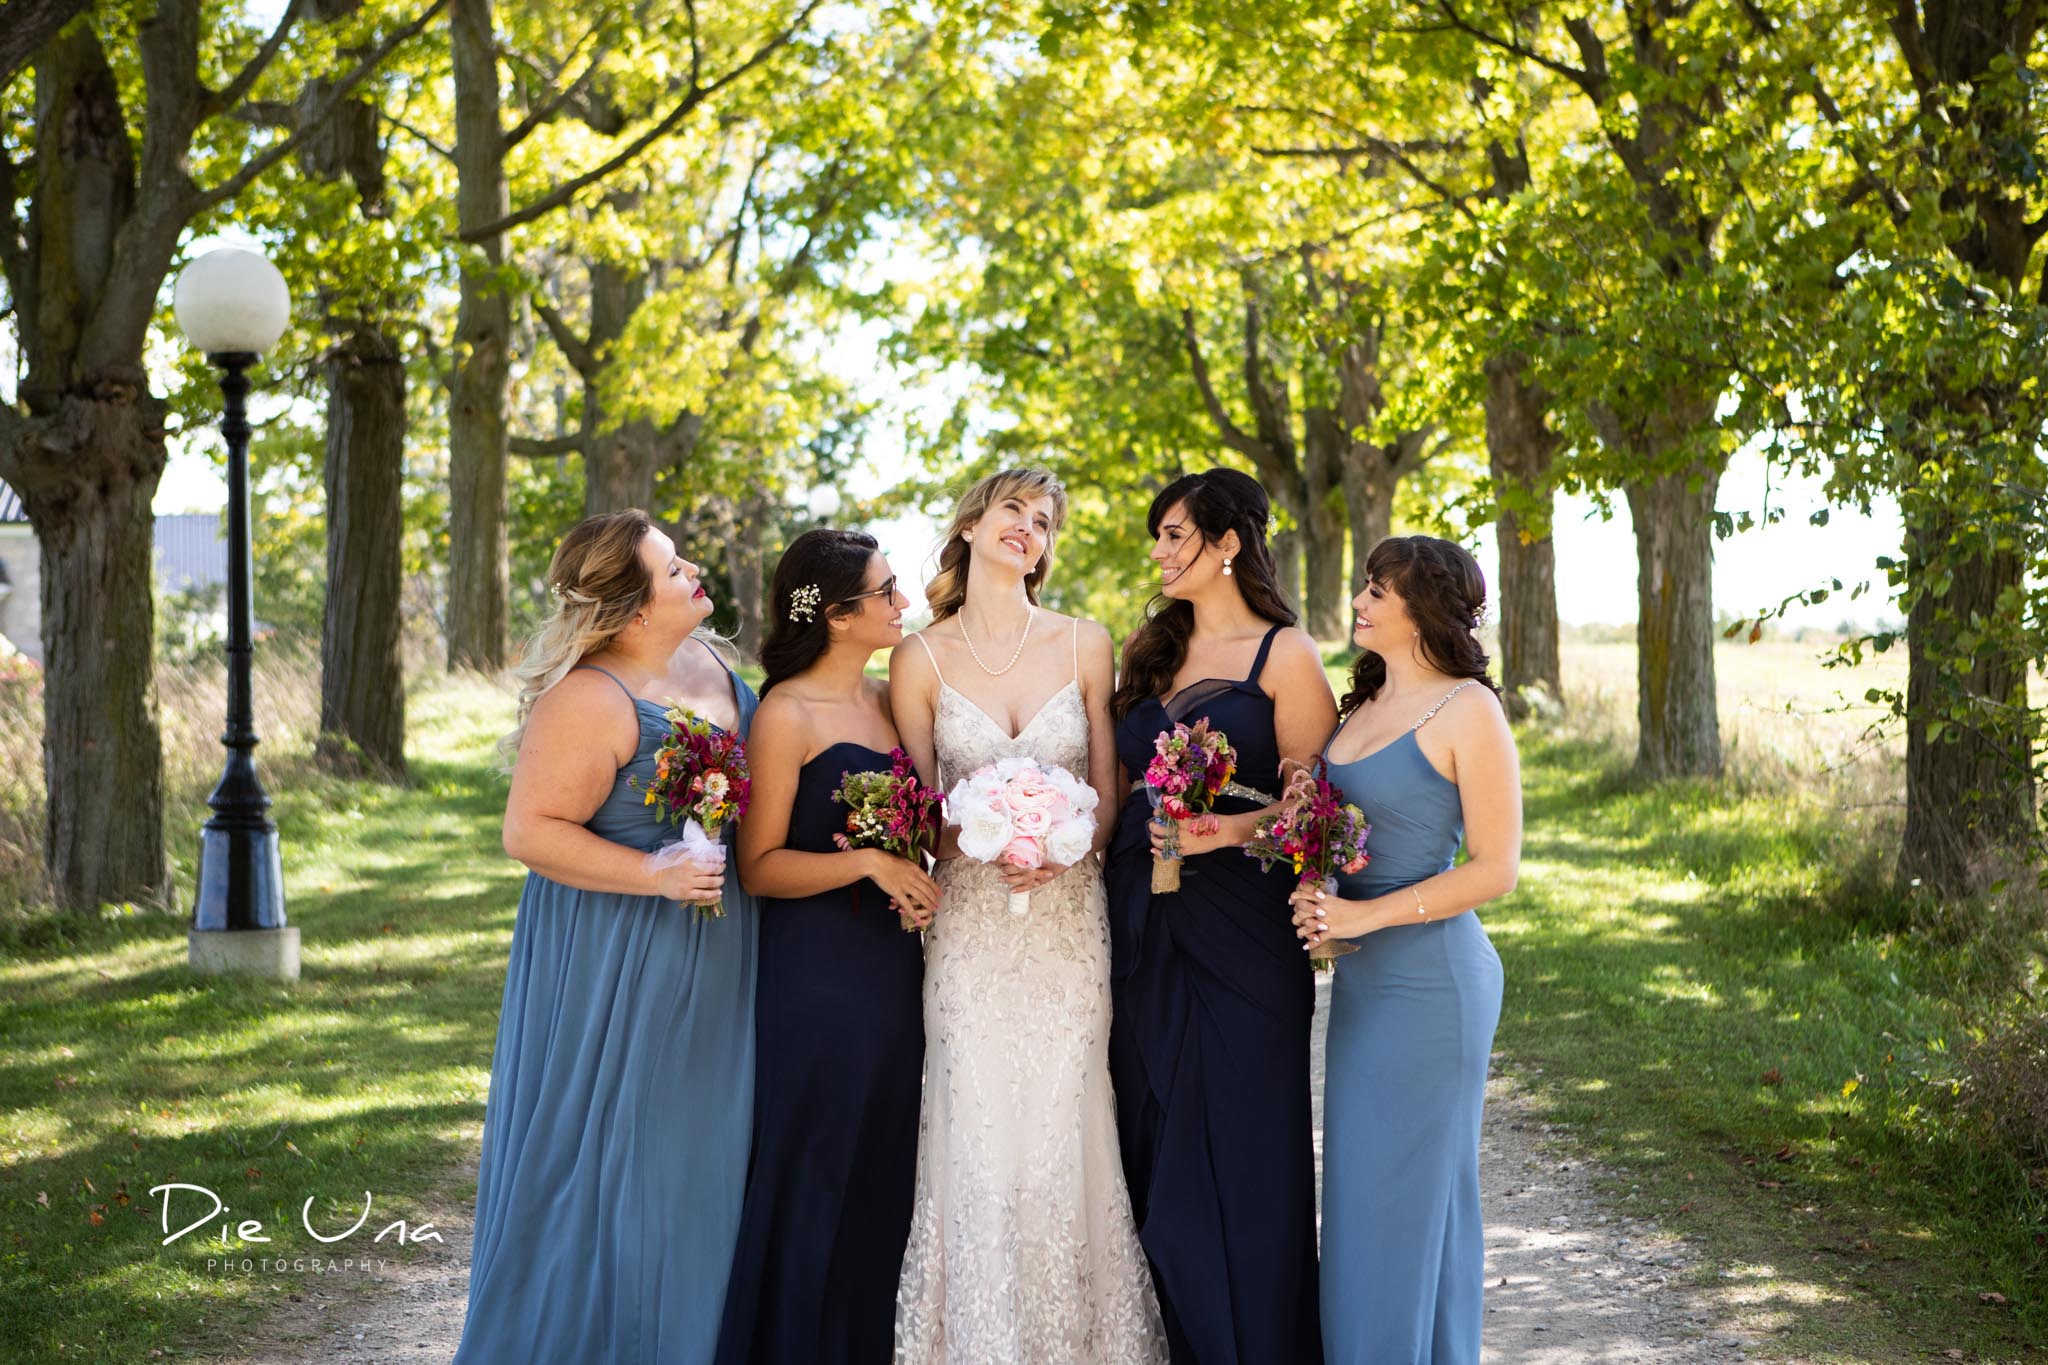 bride with bridesmaids wearing shades of blue dresses with lamp post in the background.jpg